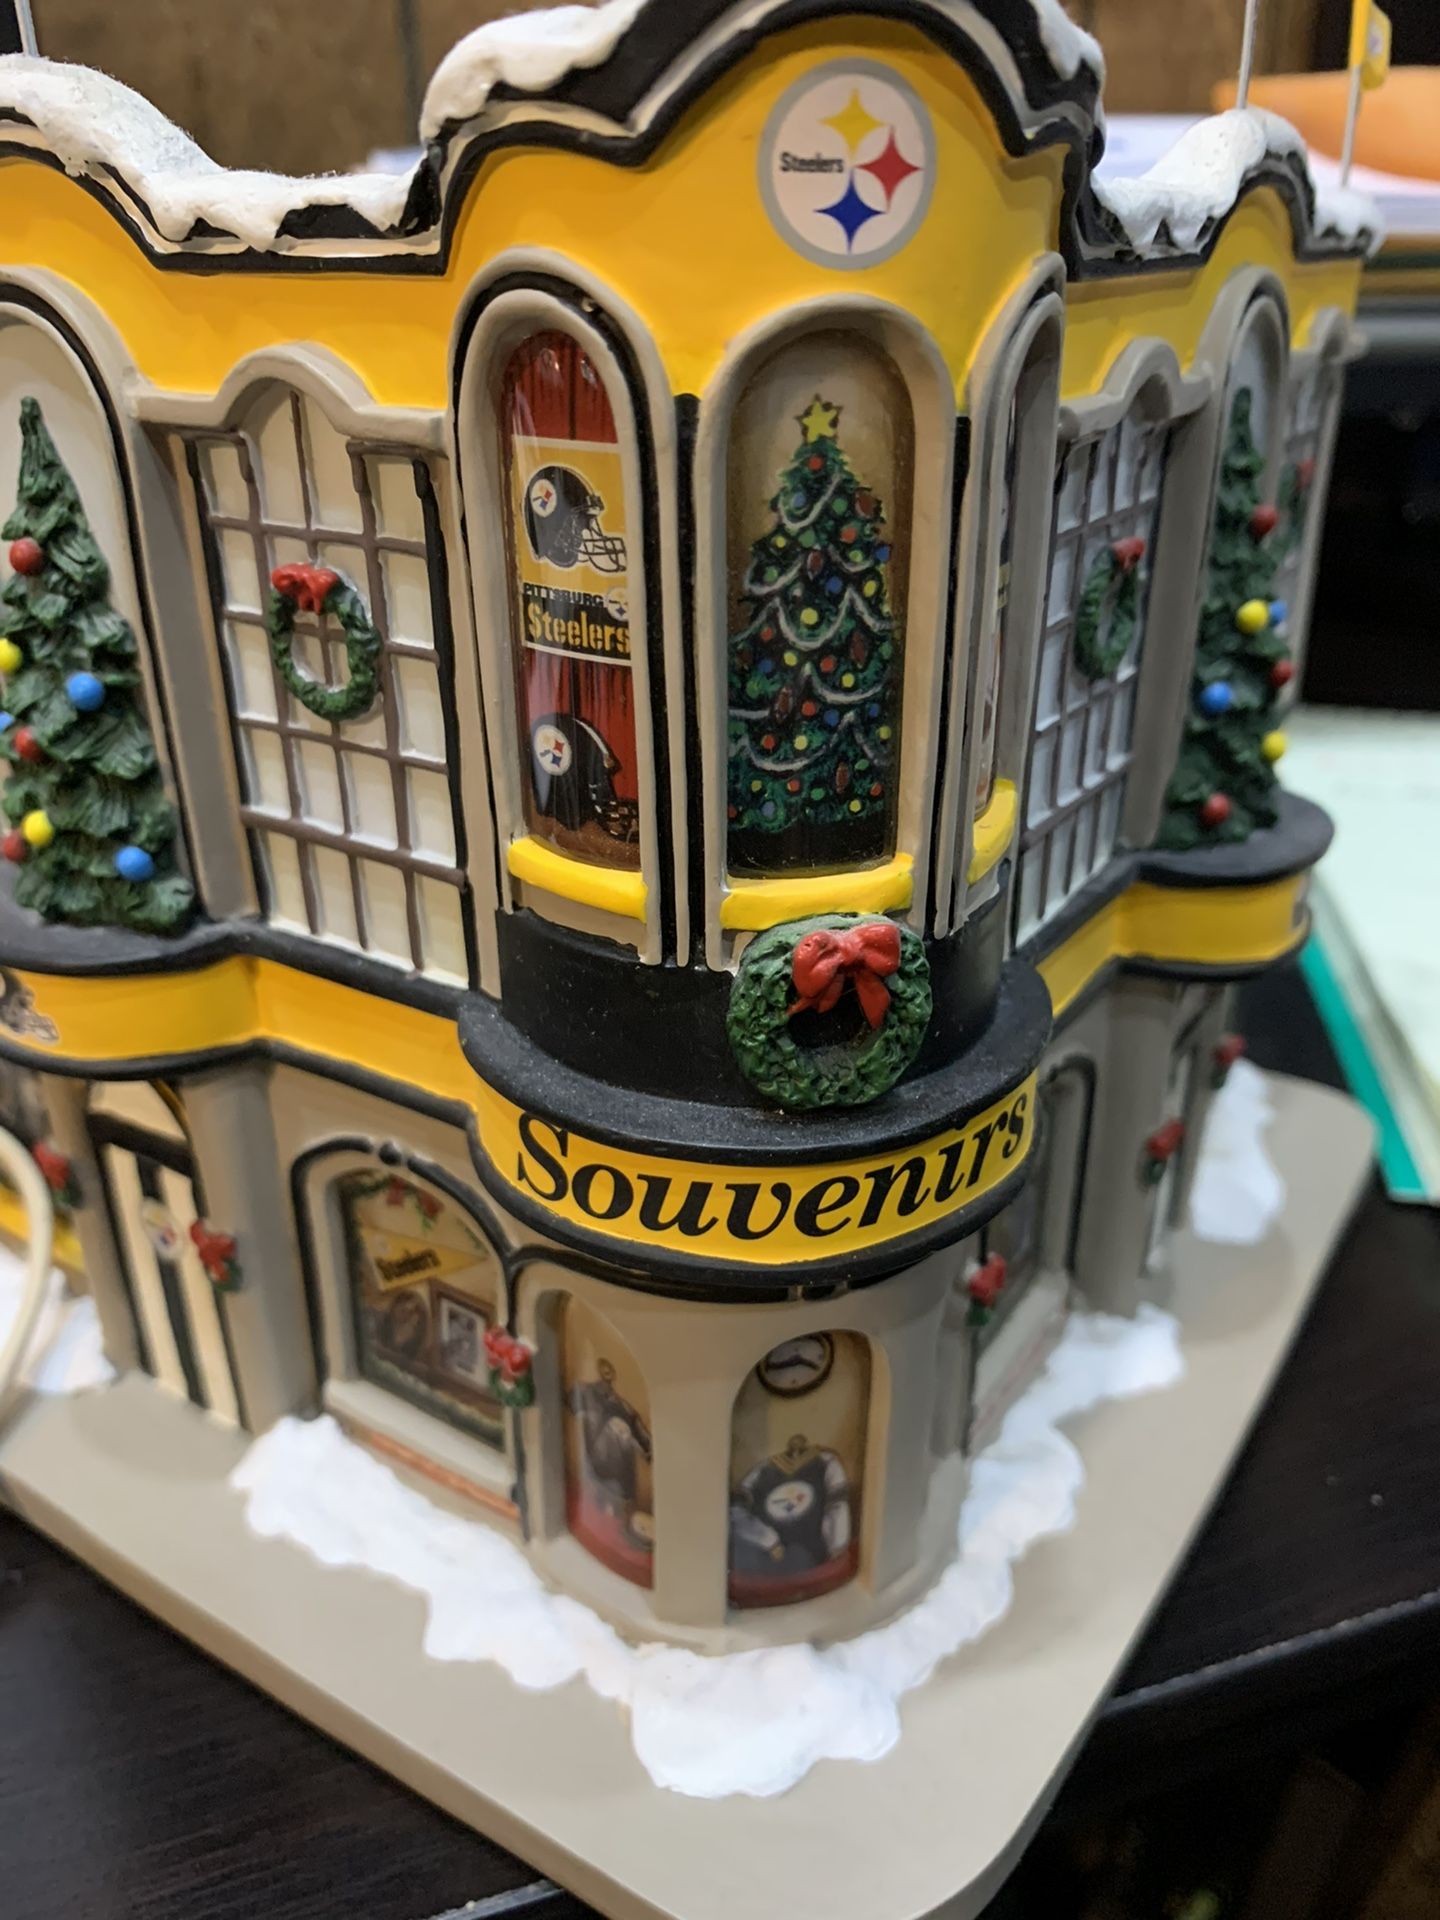 Steelers Christmas Village Reduced-Christmas Gift Priced To Sell 